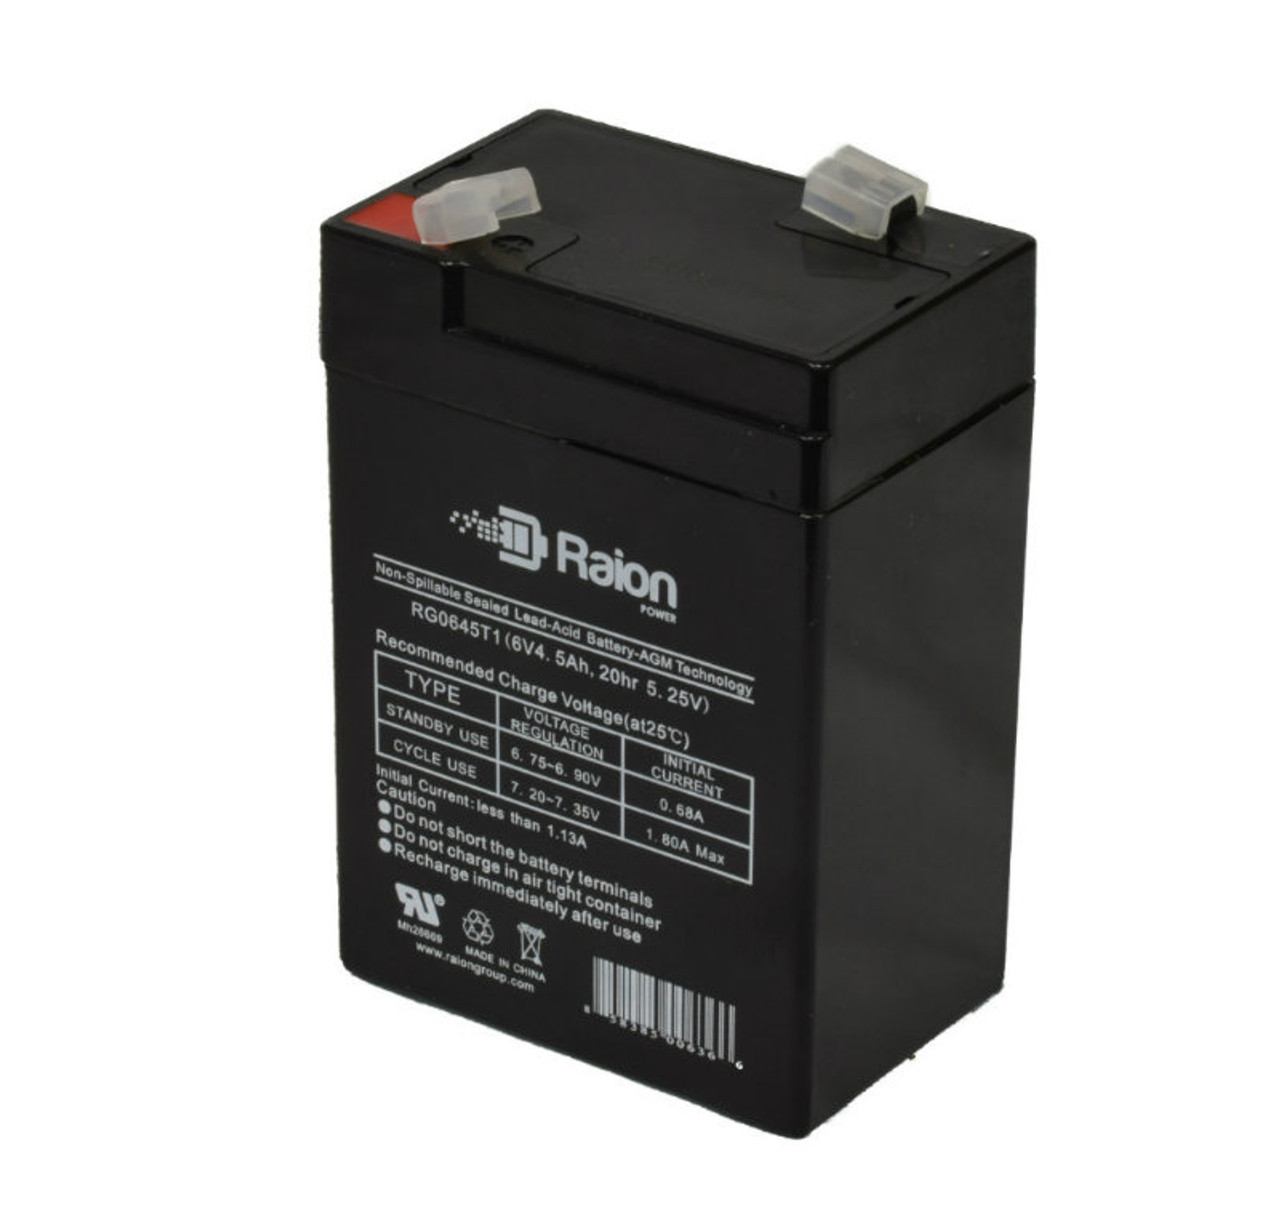 Raion Power RG0645T1 6V 4.5Ah Replacement Battery Cartridge for Welch Allyn 520084